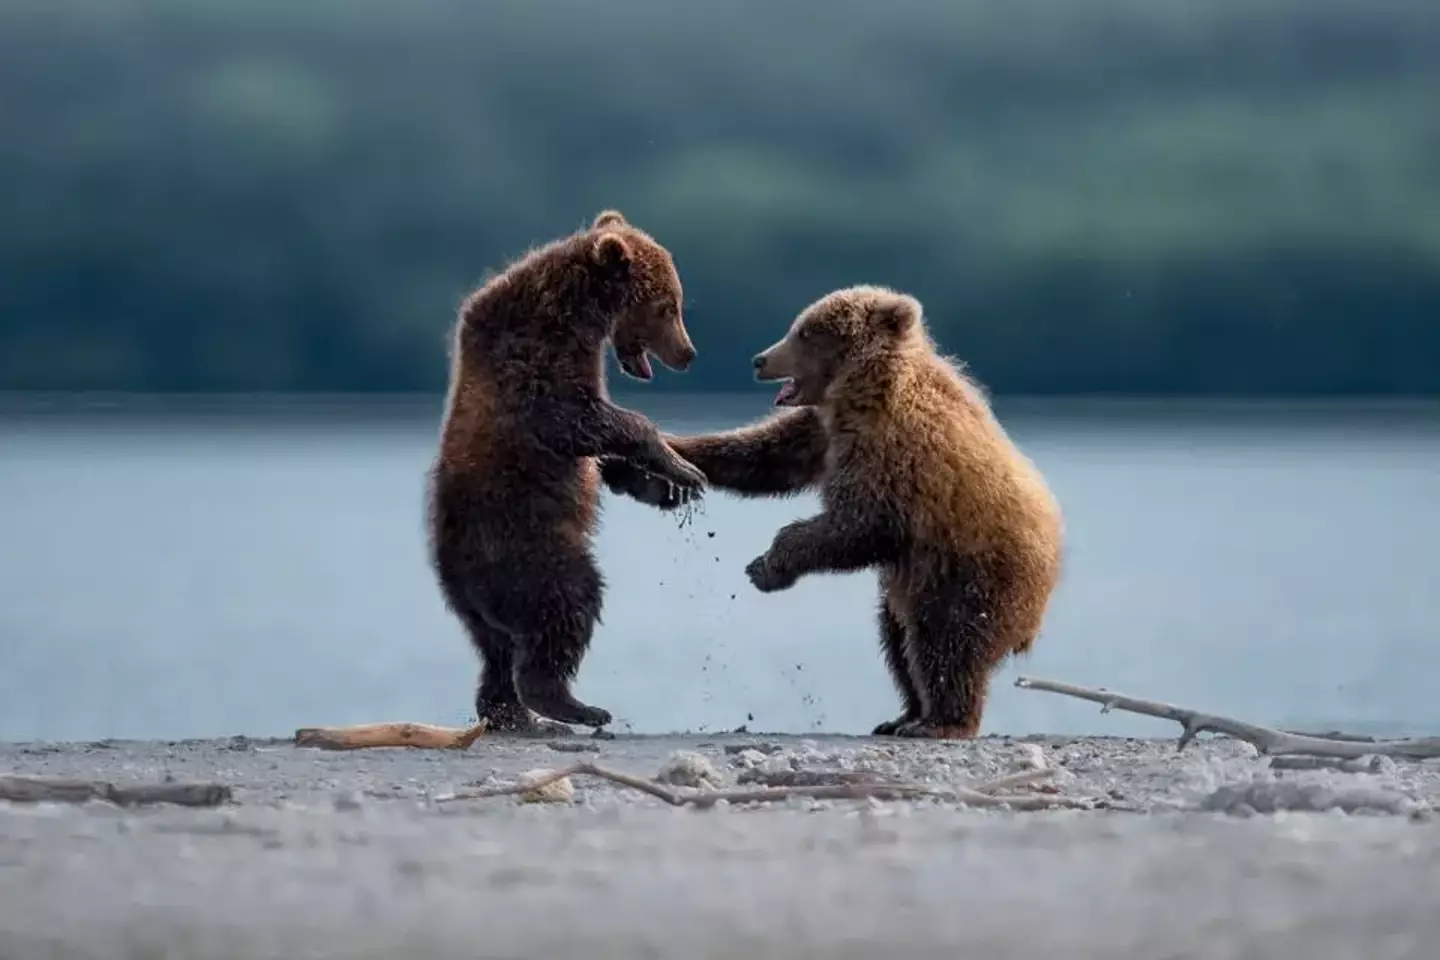 Who knew bears had their own handshakes?